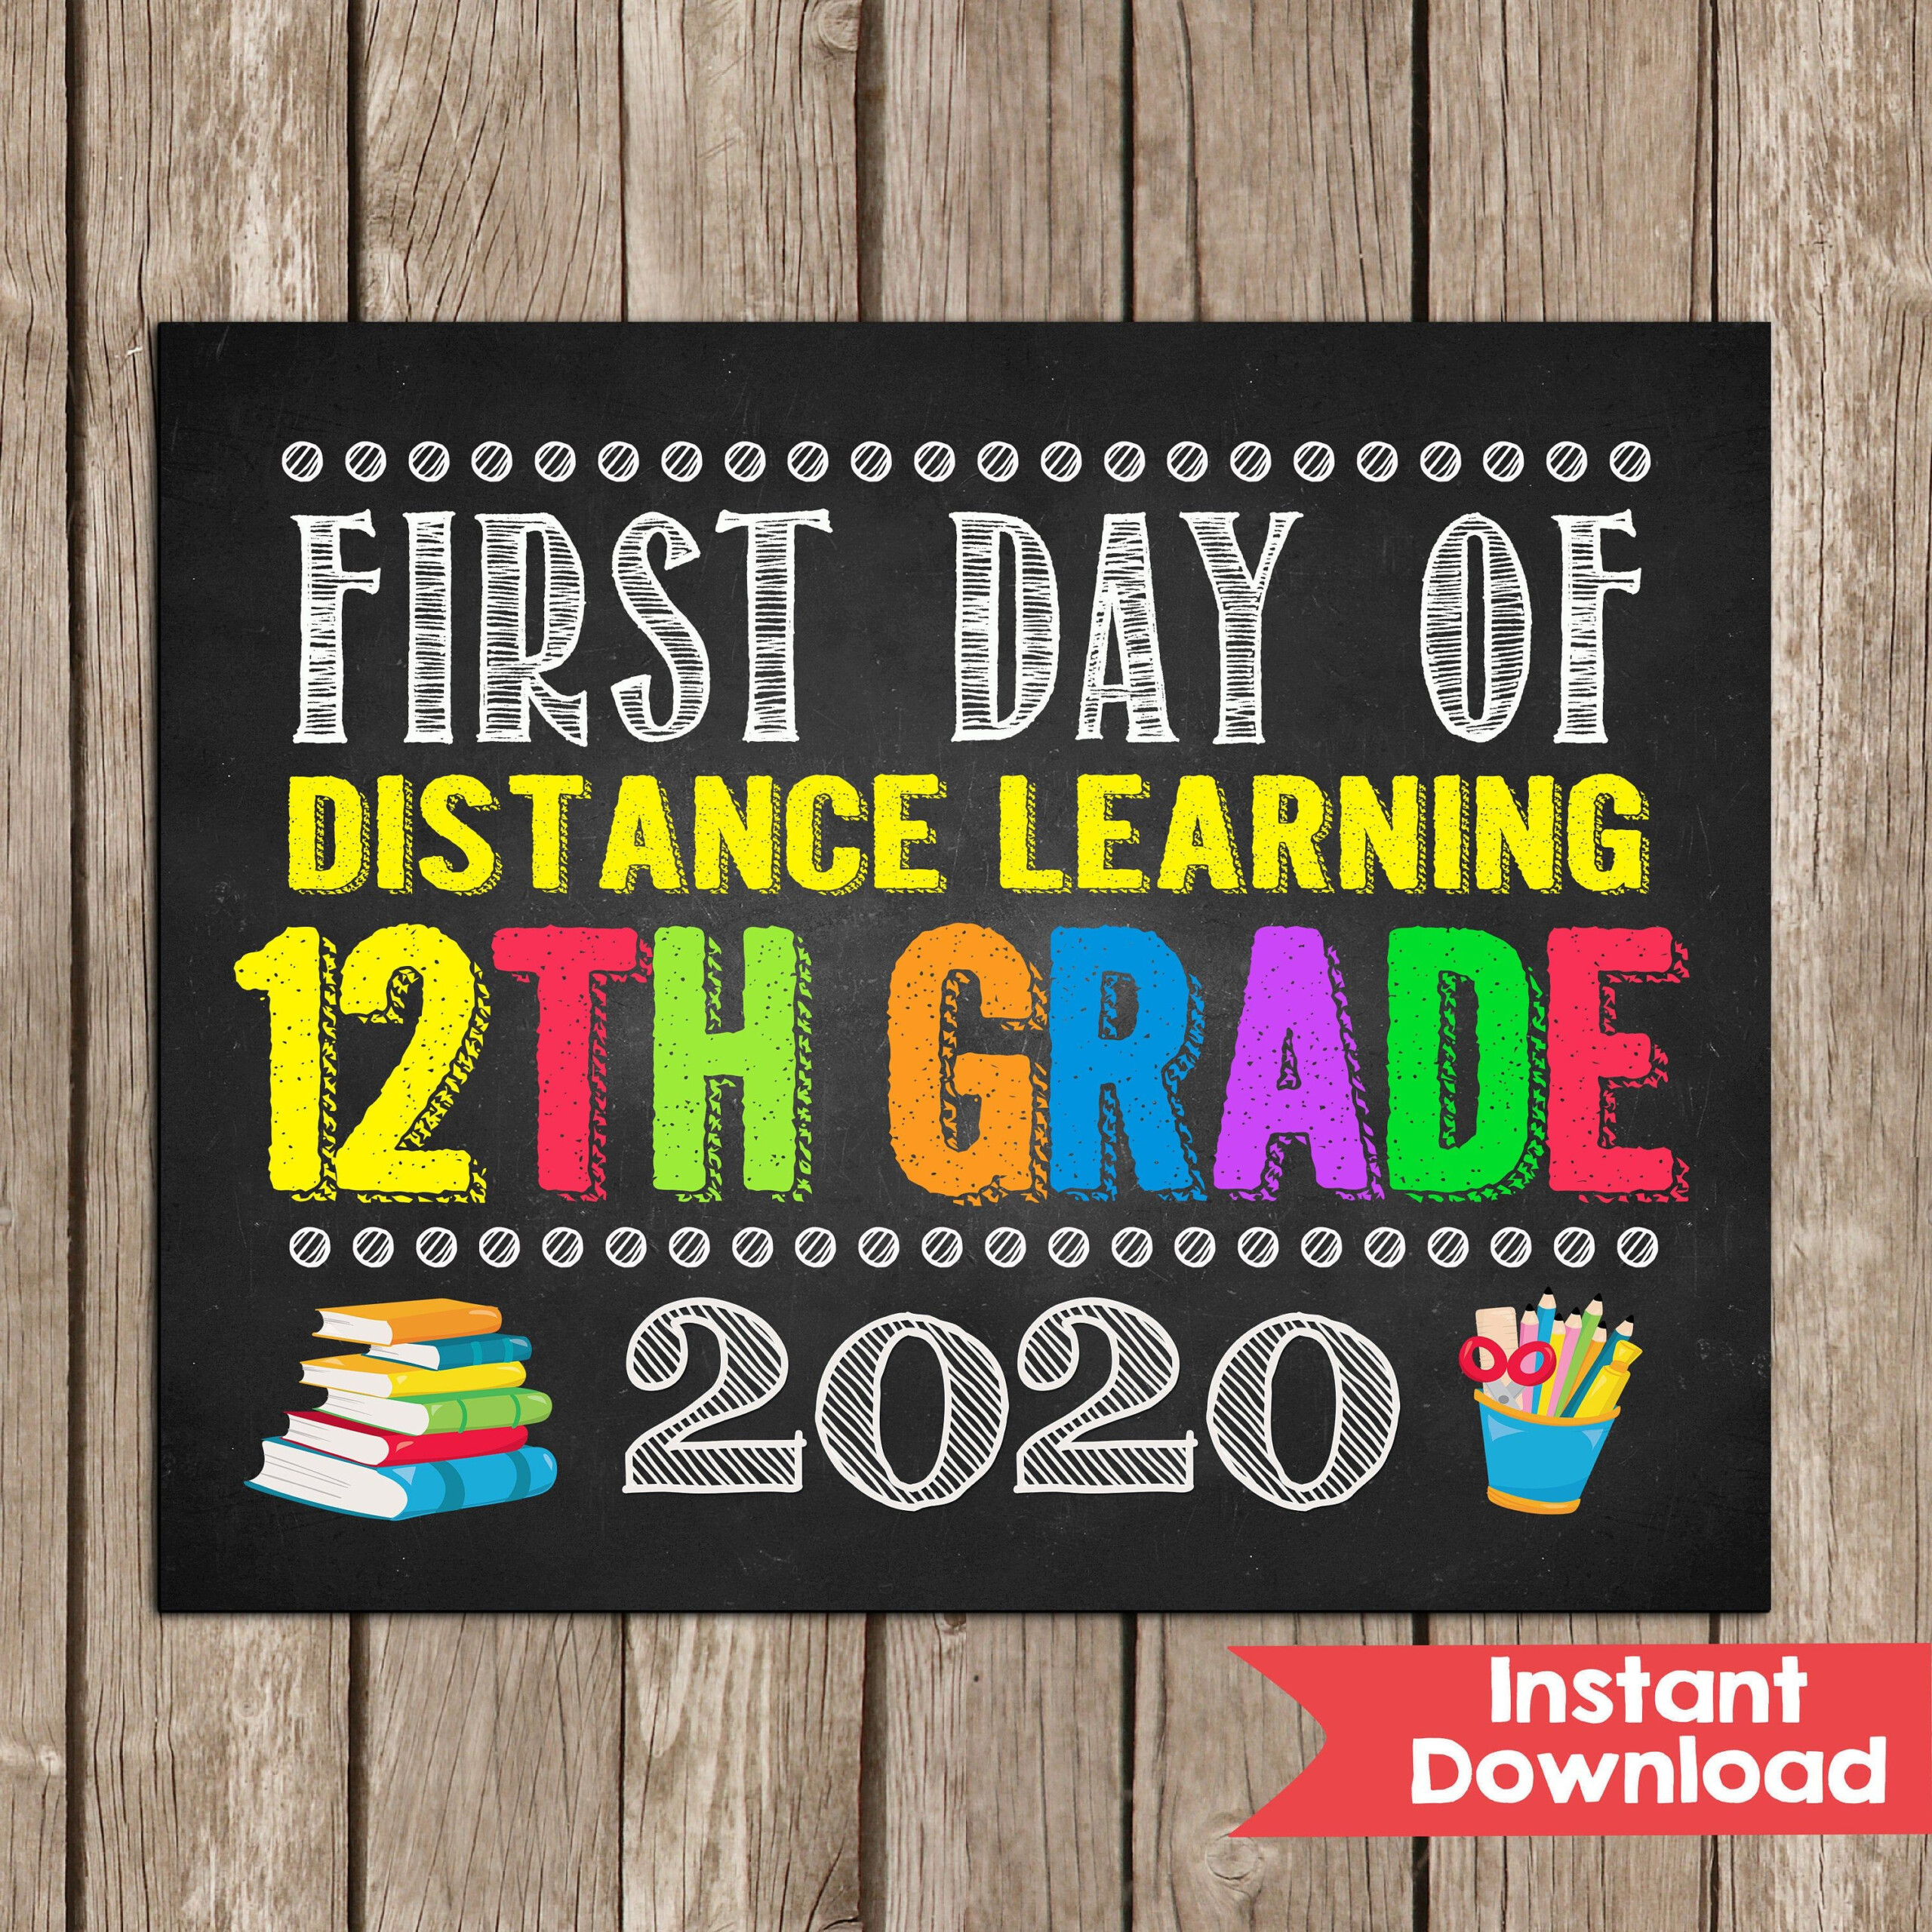 free-printable-first-day-of-distance-learning-signs-2020-chickabug